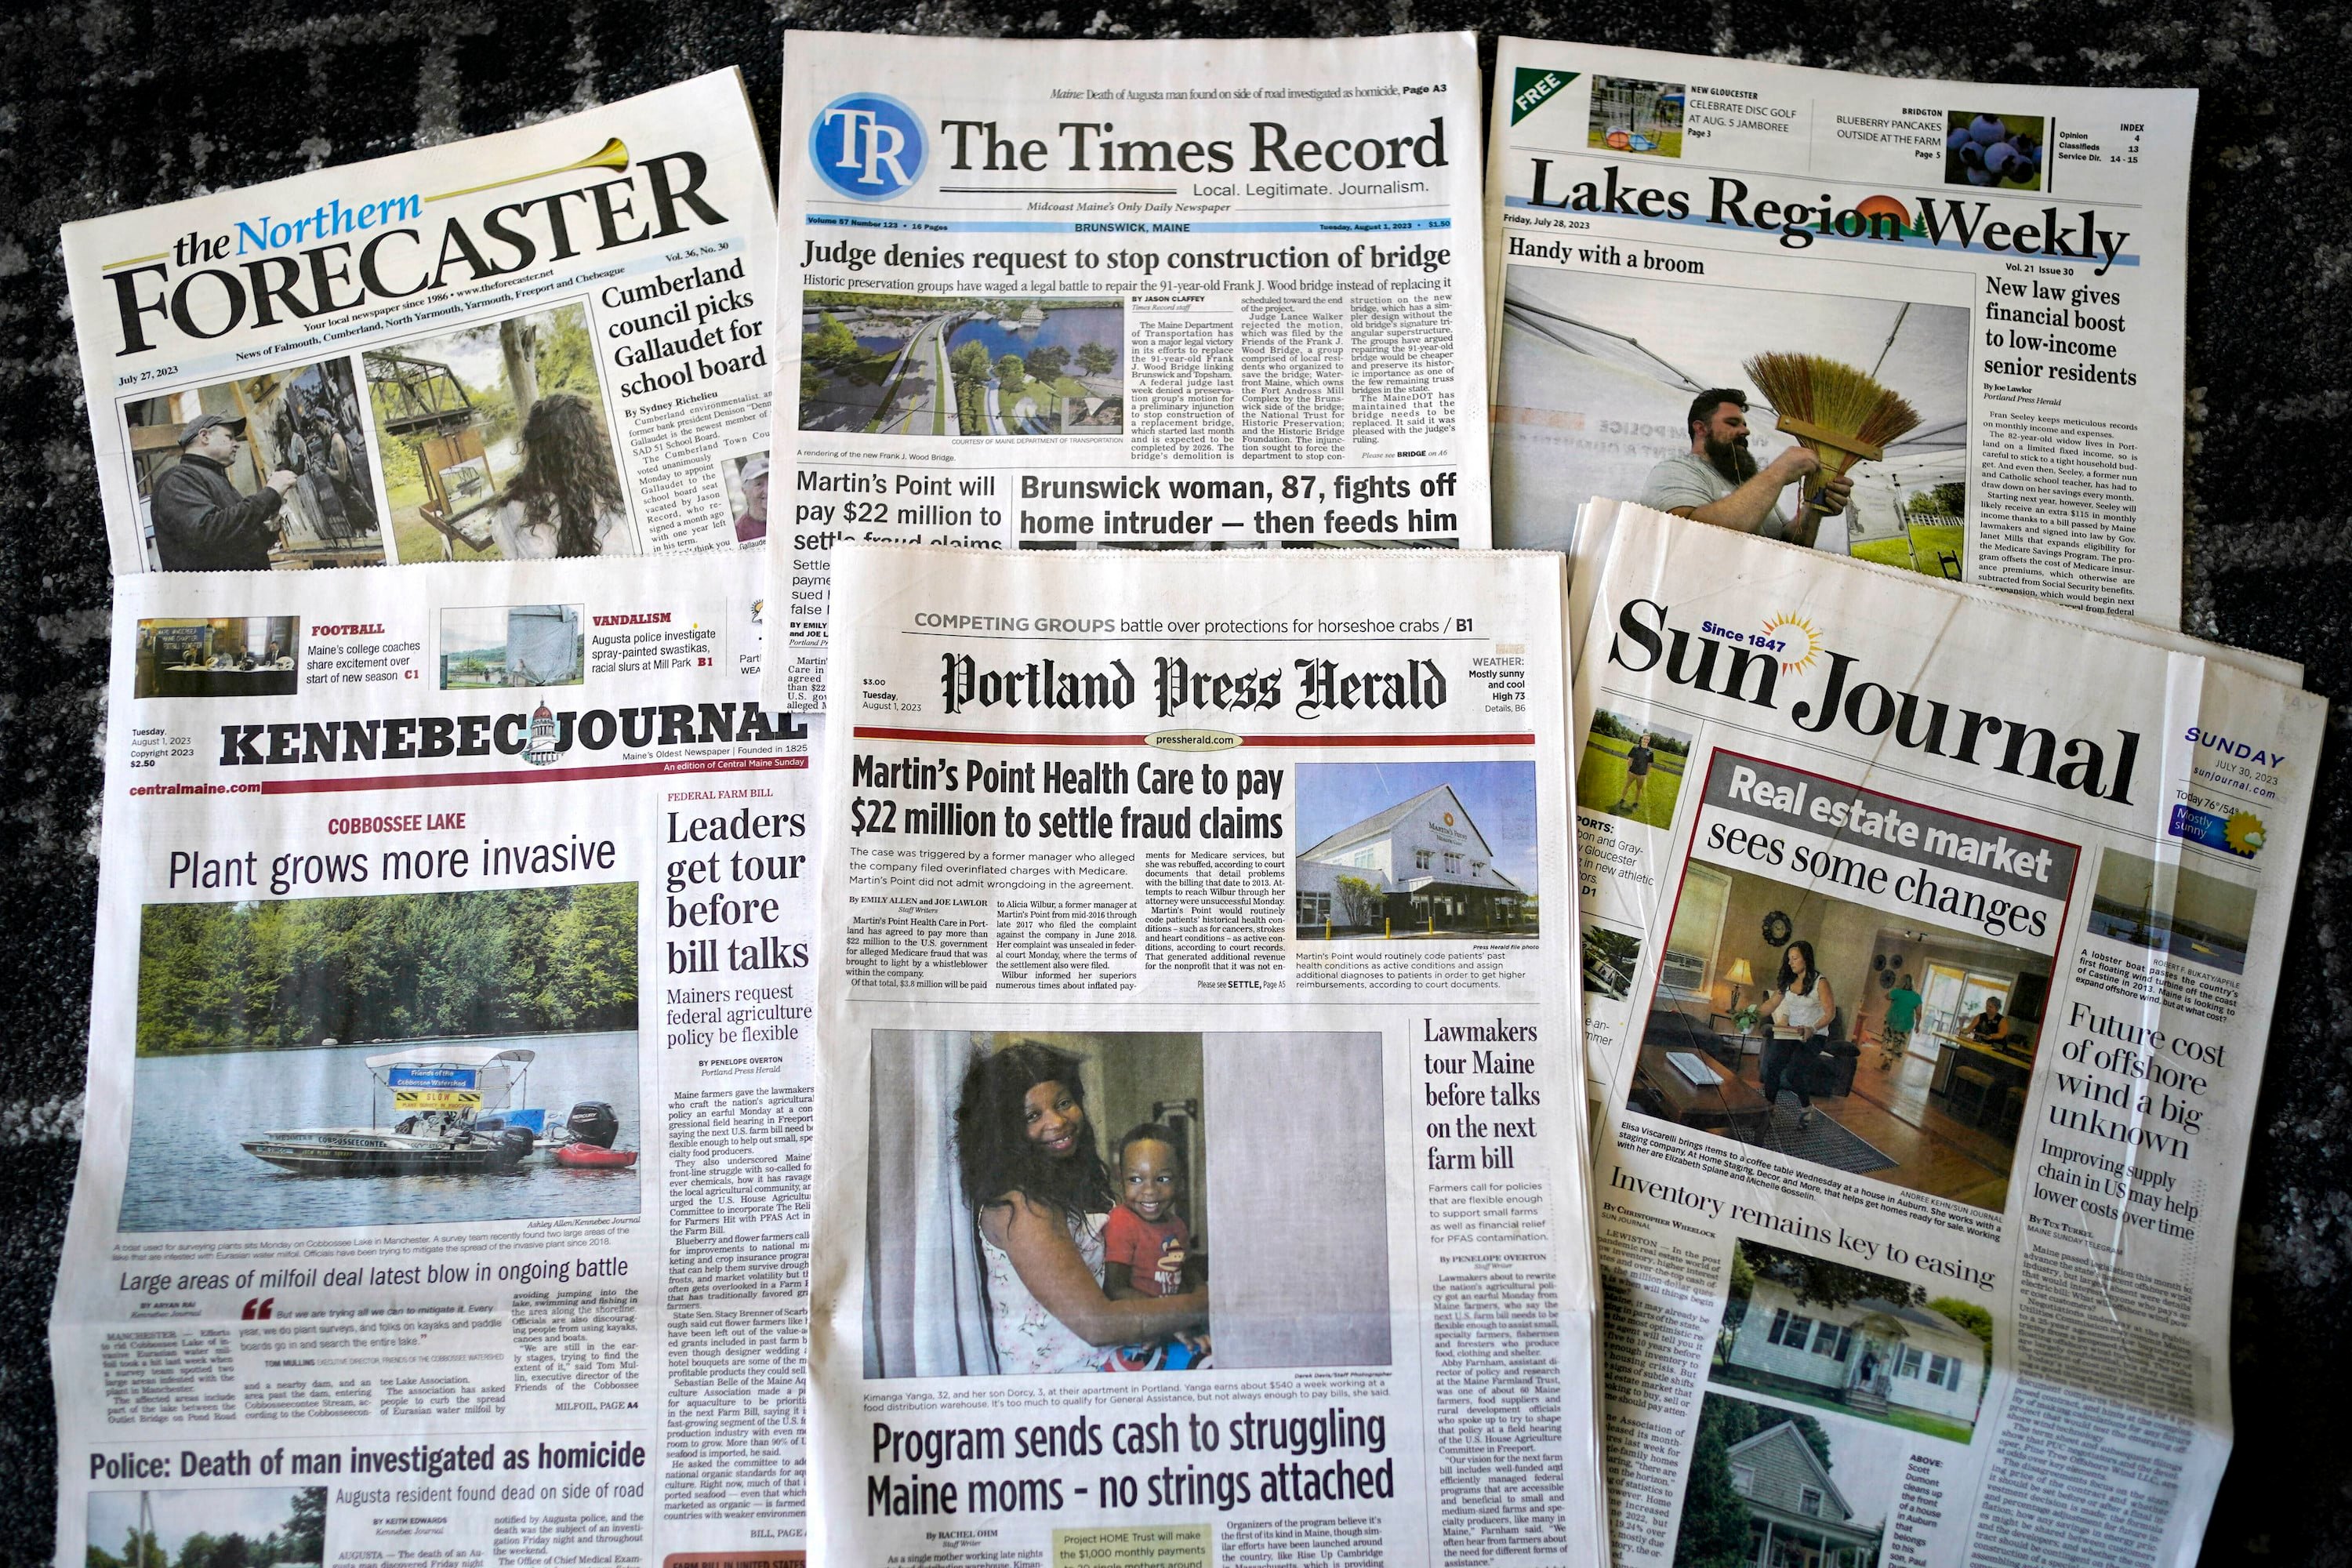 Welcome to the information age – 174 newspapers a day